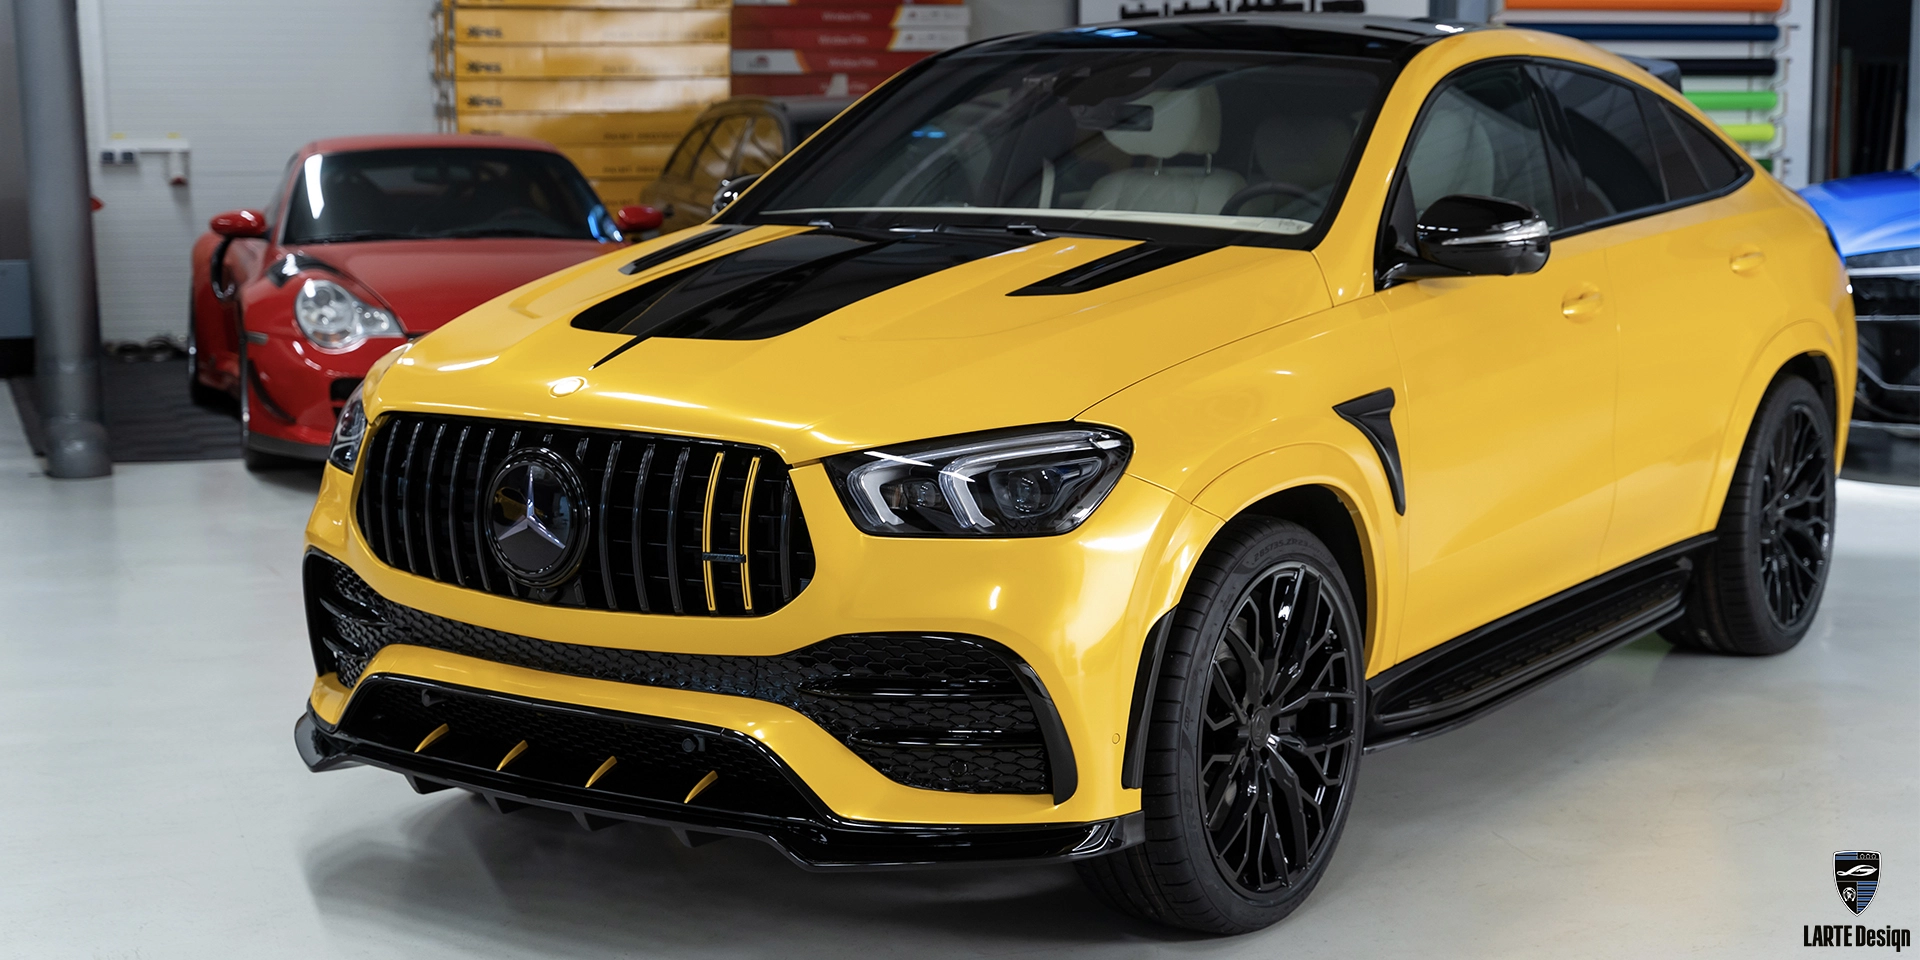 Request for acquire carbon fiber accessories for Mercedes-Benz GLE Coupe 53 4MATIC+ С167 SOLAR BEAM YELLOW WRAP